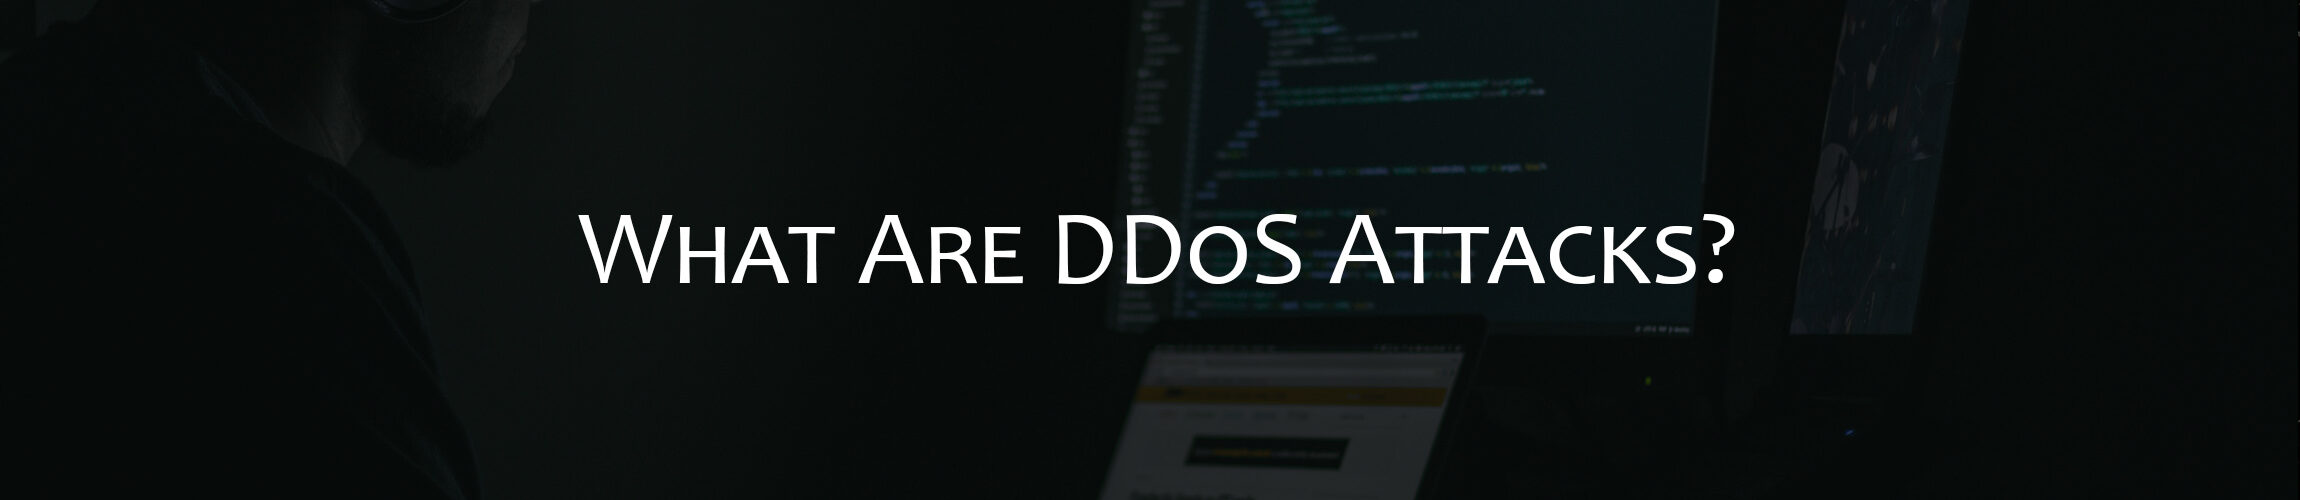 how to prevent ddos attacks on linux server